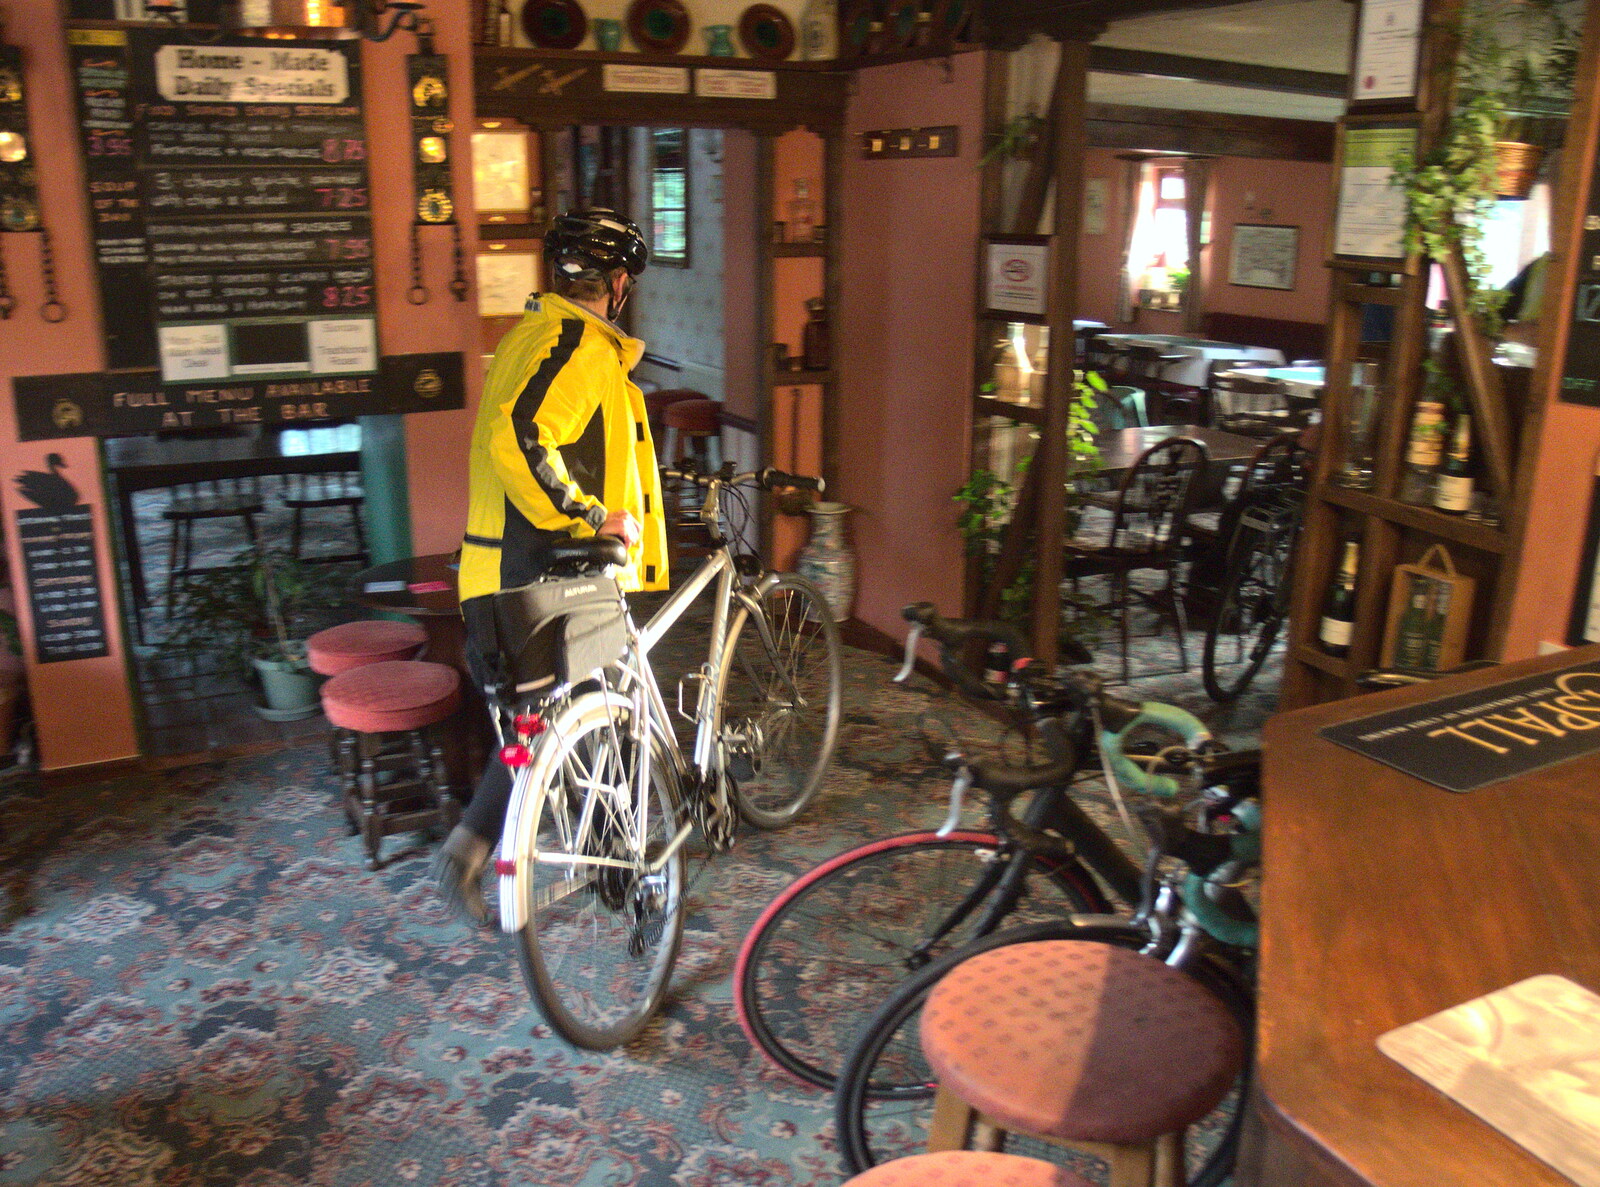 Pippa stashes her bike in the pub from The BSCC at the Mellis Railway and The Swan, Brome, Suffolk - 8th June 2017